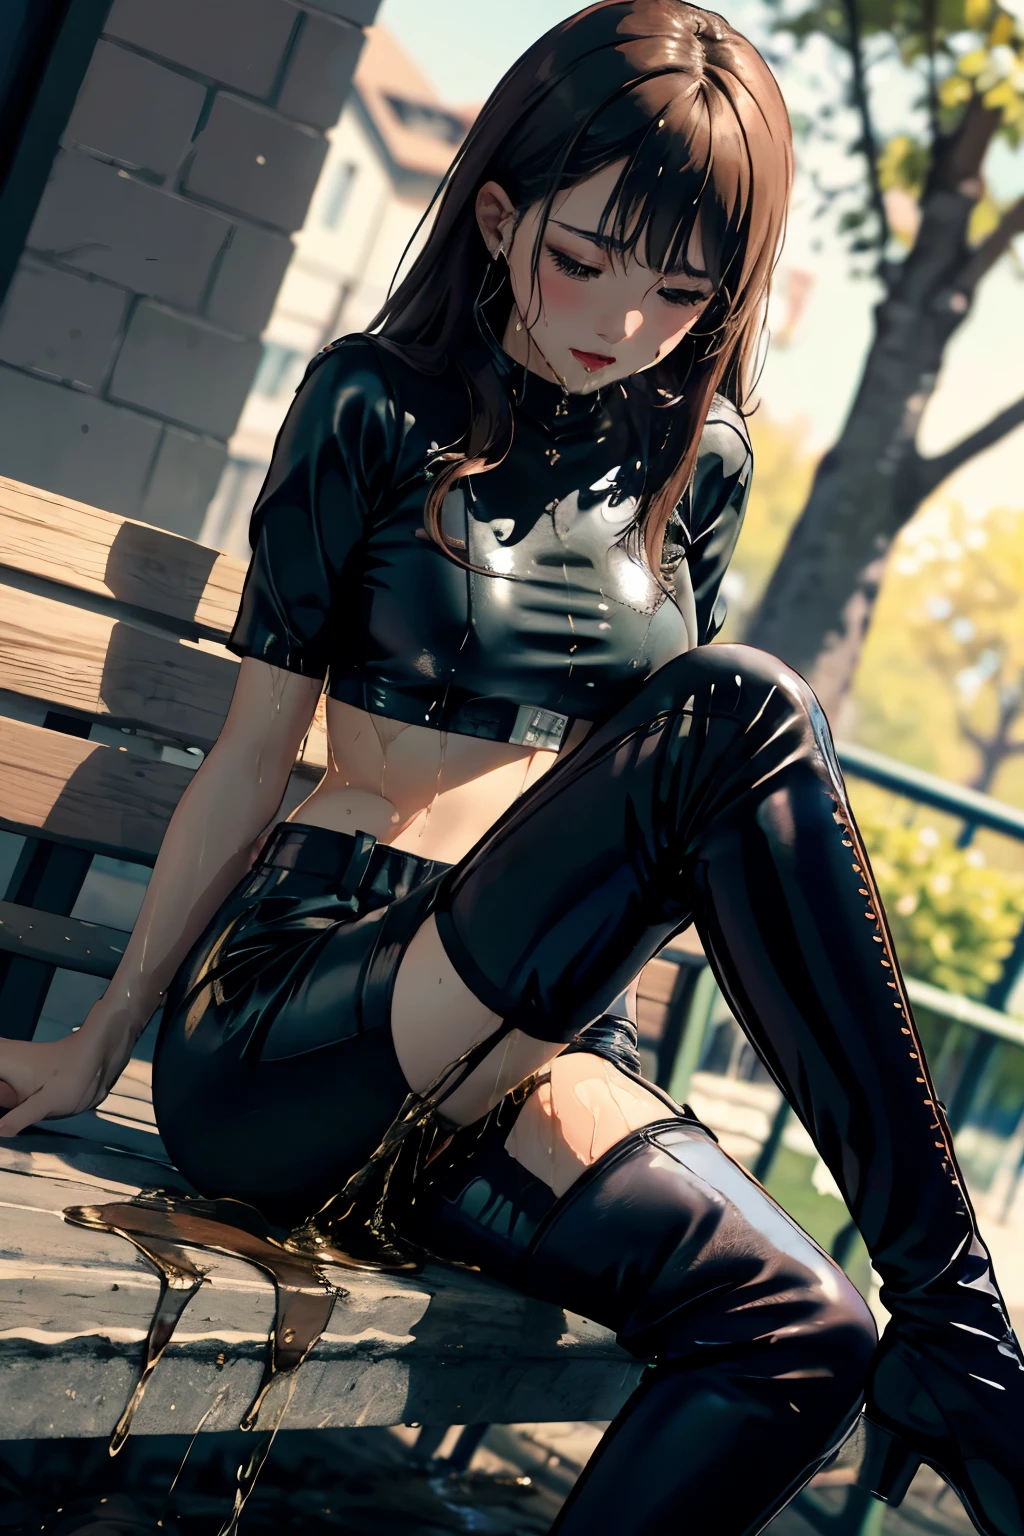 highres, beautiful women, high detail, good lighting, lewd, hentai, (no nudity), ((((wet bike shorts)))), ((tight leather top)), ((((leather thigh high boots)))), bare midriff, (wet pants), (((wetting herself))), (((peeing herself))), (((peeing self))), (pee streaming down legs), peeing stain, (puddle), (thick thighs), nice long legs, lipstick, detailed face, pretty face, pretty hands, embarrassed blushing face, humiliated, ((sitting legs crossed)), (sitting on a bench), hihelz